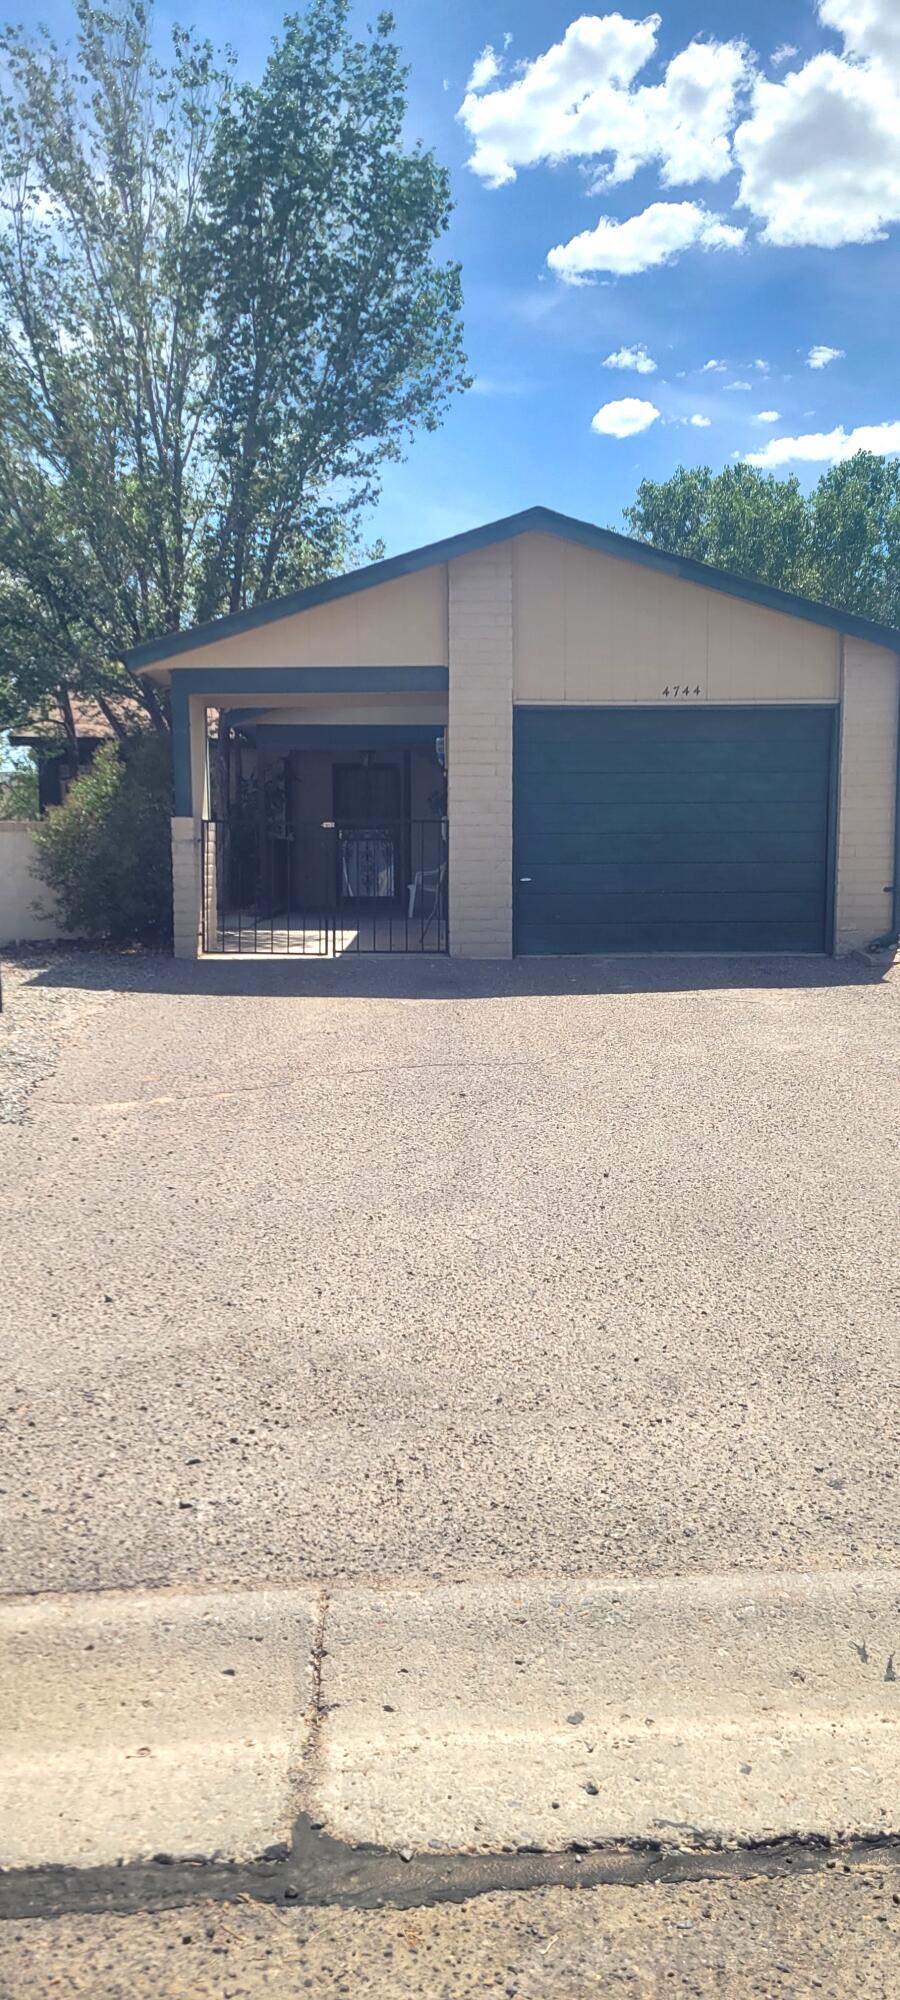 Come see this cute 2 bedroom/2 bath home in super location in Rio Rancho.  Two bedrooms (garage was converted to bedroom) plus the converted bedroom has an attached office/den.   Large kitchen with plenty of cabinet space.  New refrigerator and stove to be installed prior to closing.  Nice covered patio out back. Furnace and evaporative cooler replaced within the last 3 years.